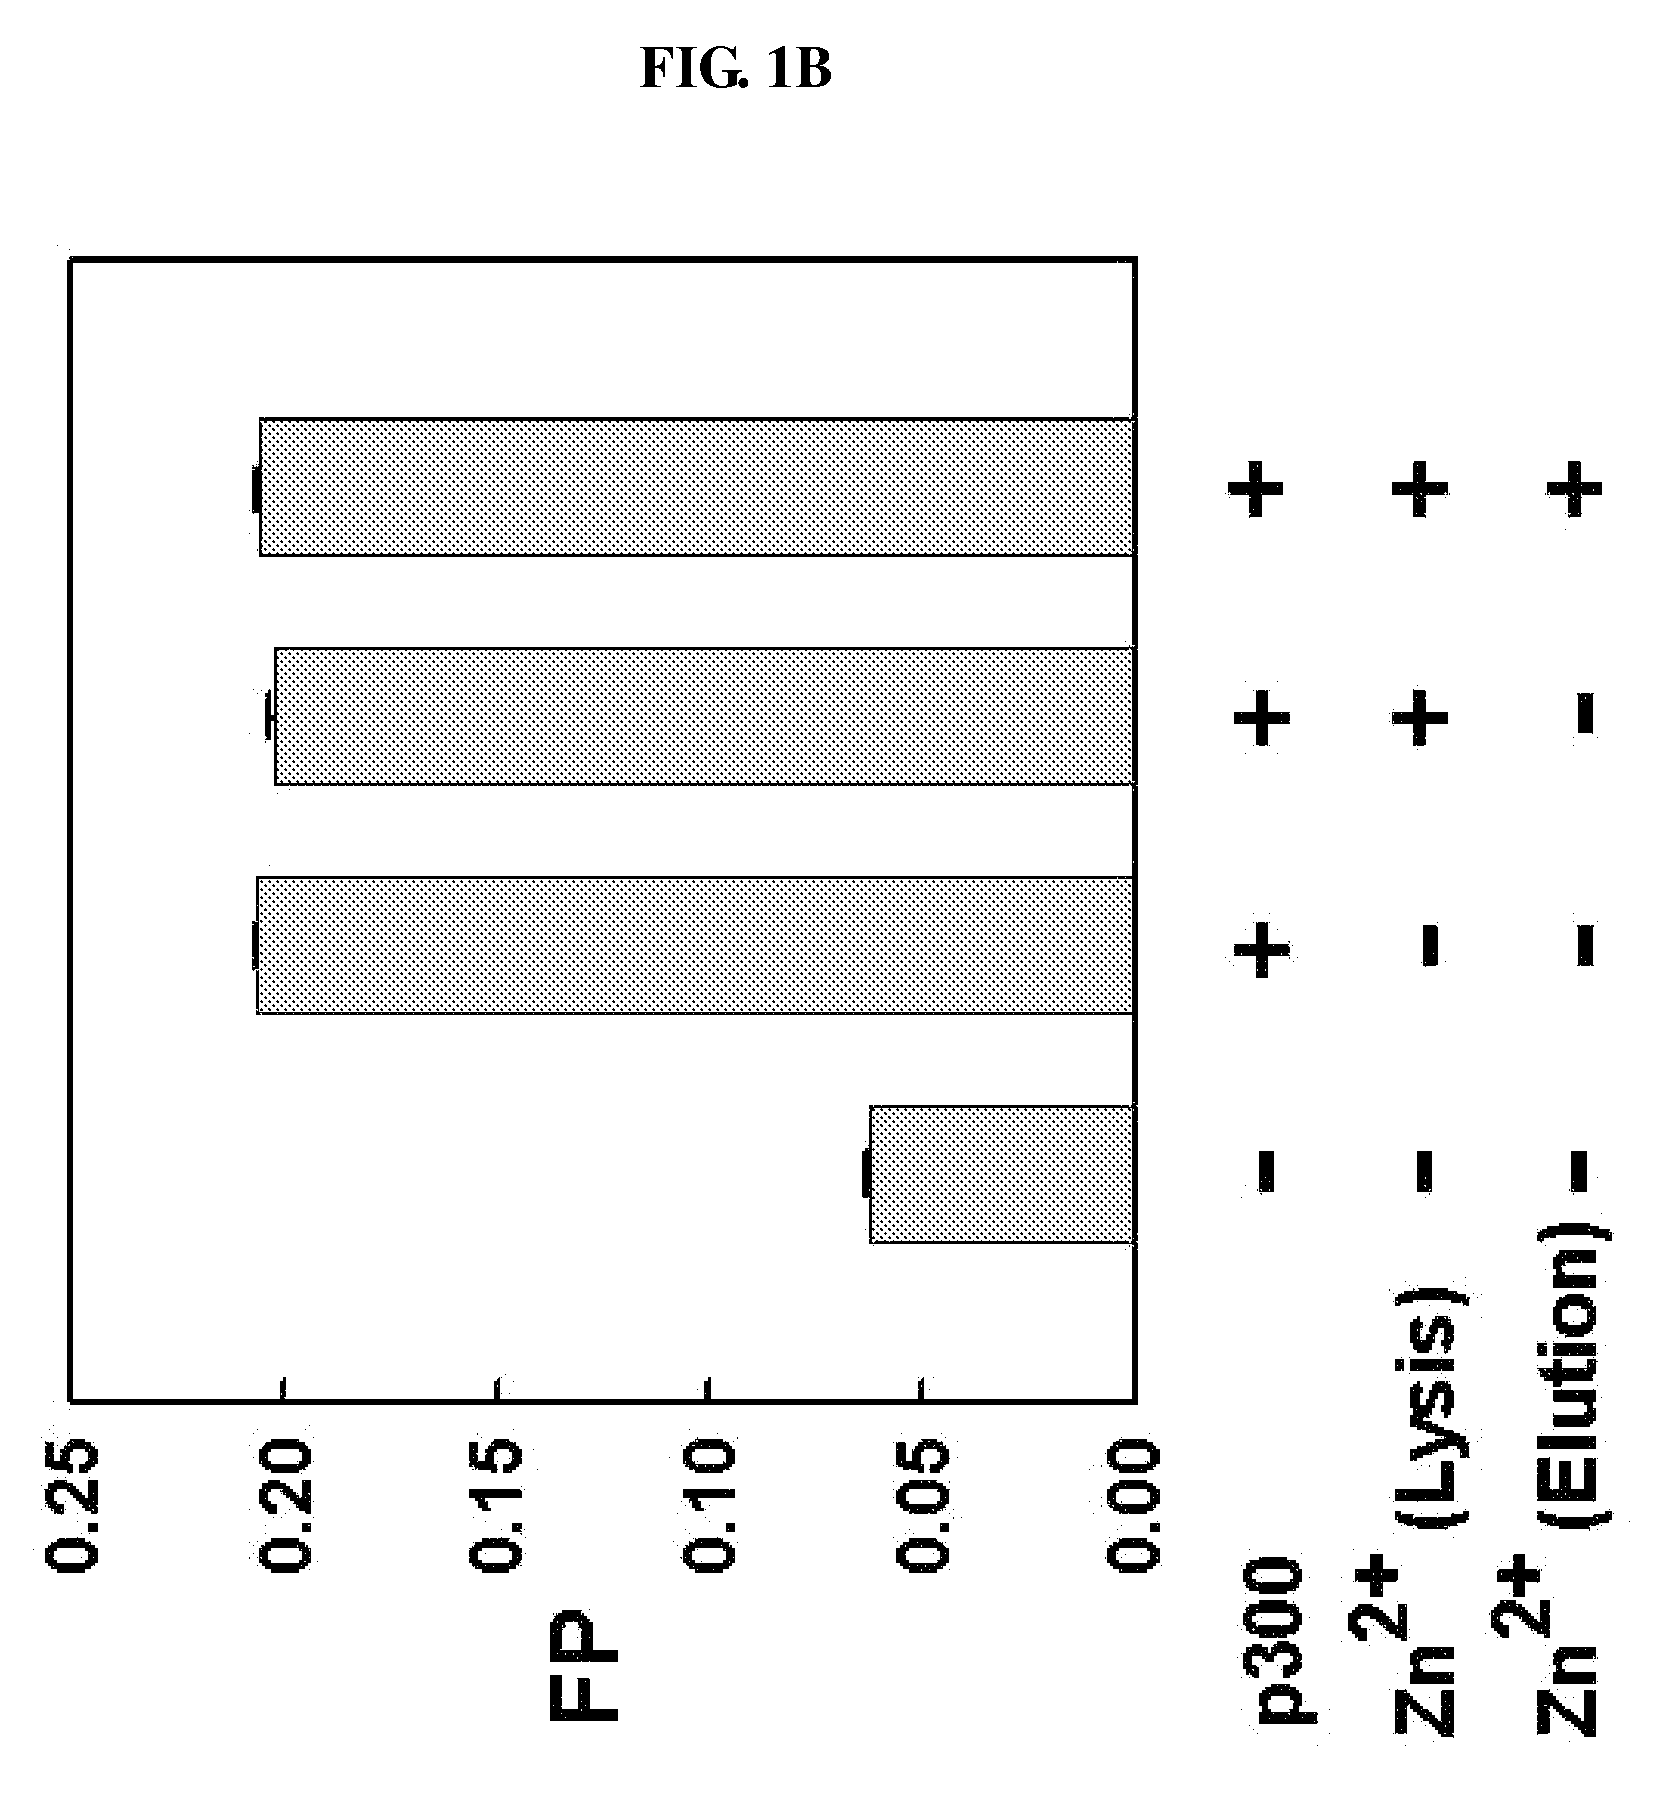 METHOD FOR QUANTITATIVE ANALYSIS OF INTERACTIONS BETWEEN HIF-1ALPHA C-TERMINAL PEPTIDES AND CBP OR p300 PROTEINS AND METHOD OF SCREENING INHIBITORS USING THE SAME